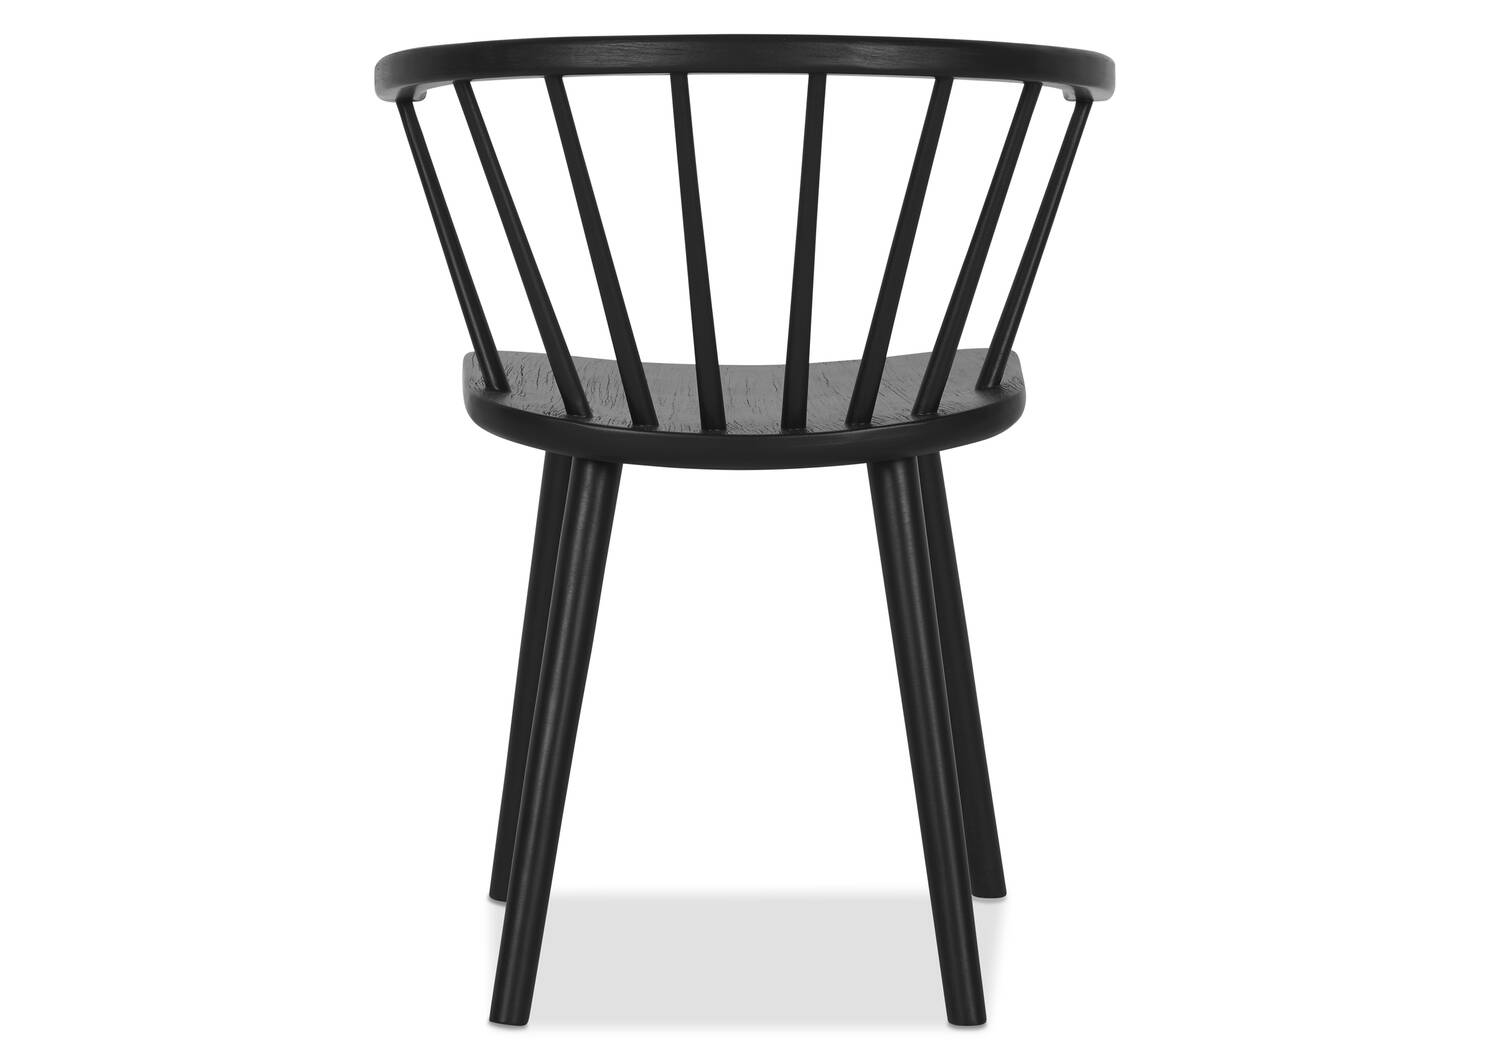 Oxley Dining Chair -Millis Black